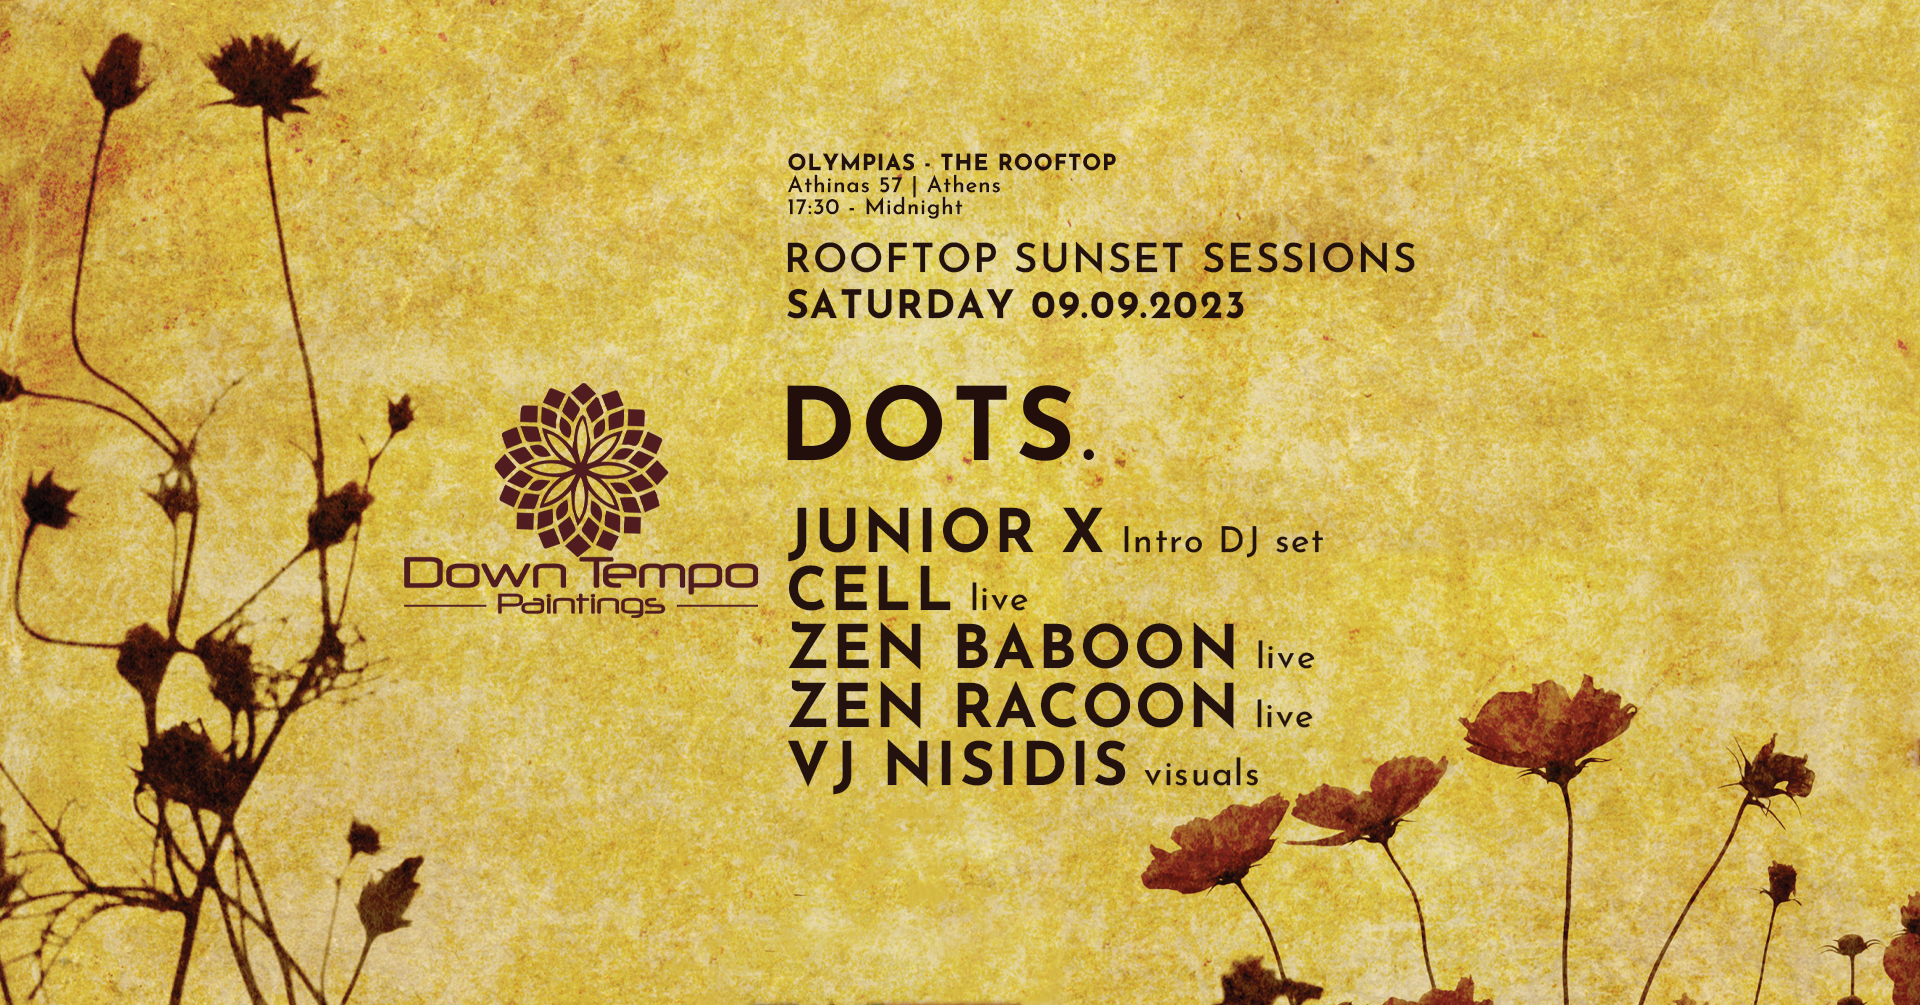 DOTS. - Cell & ZEN Baboon Live // Rooftop Sunset Session - Página trasera